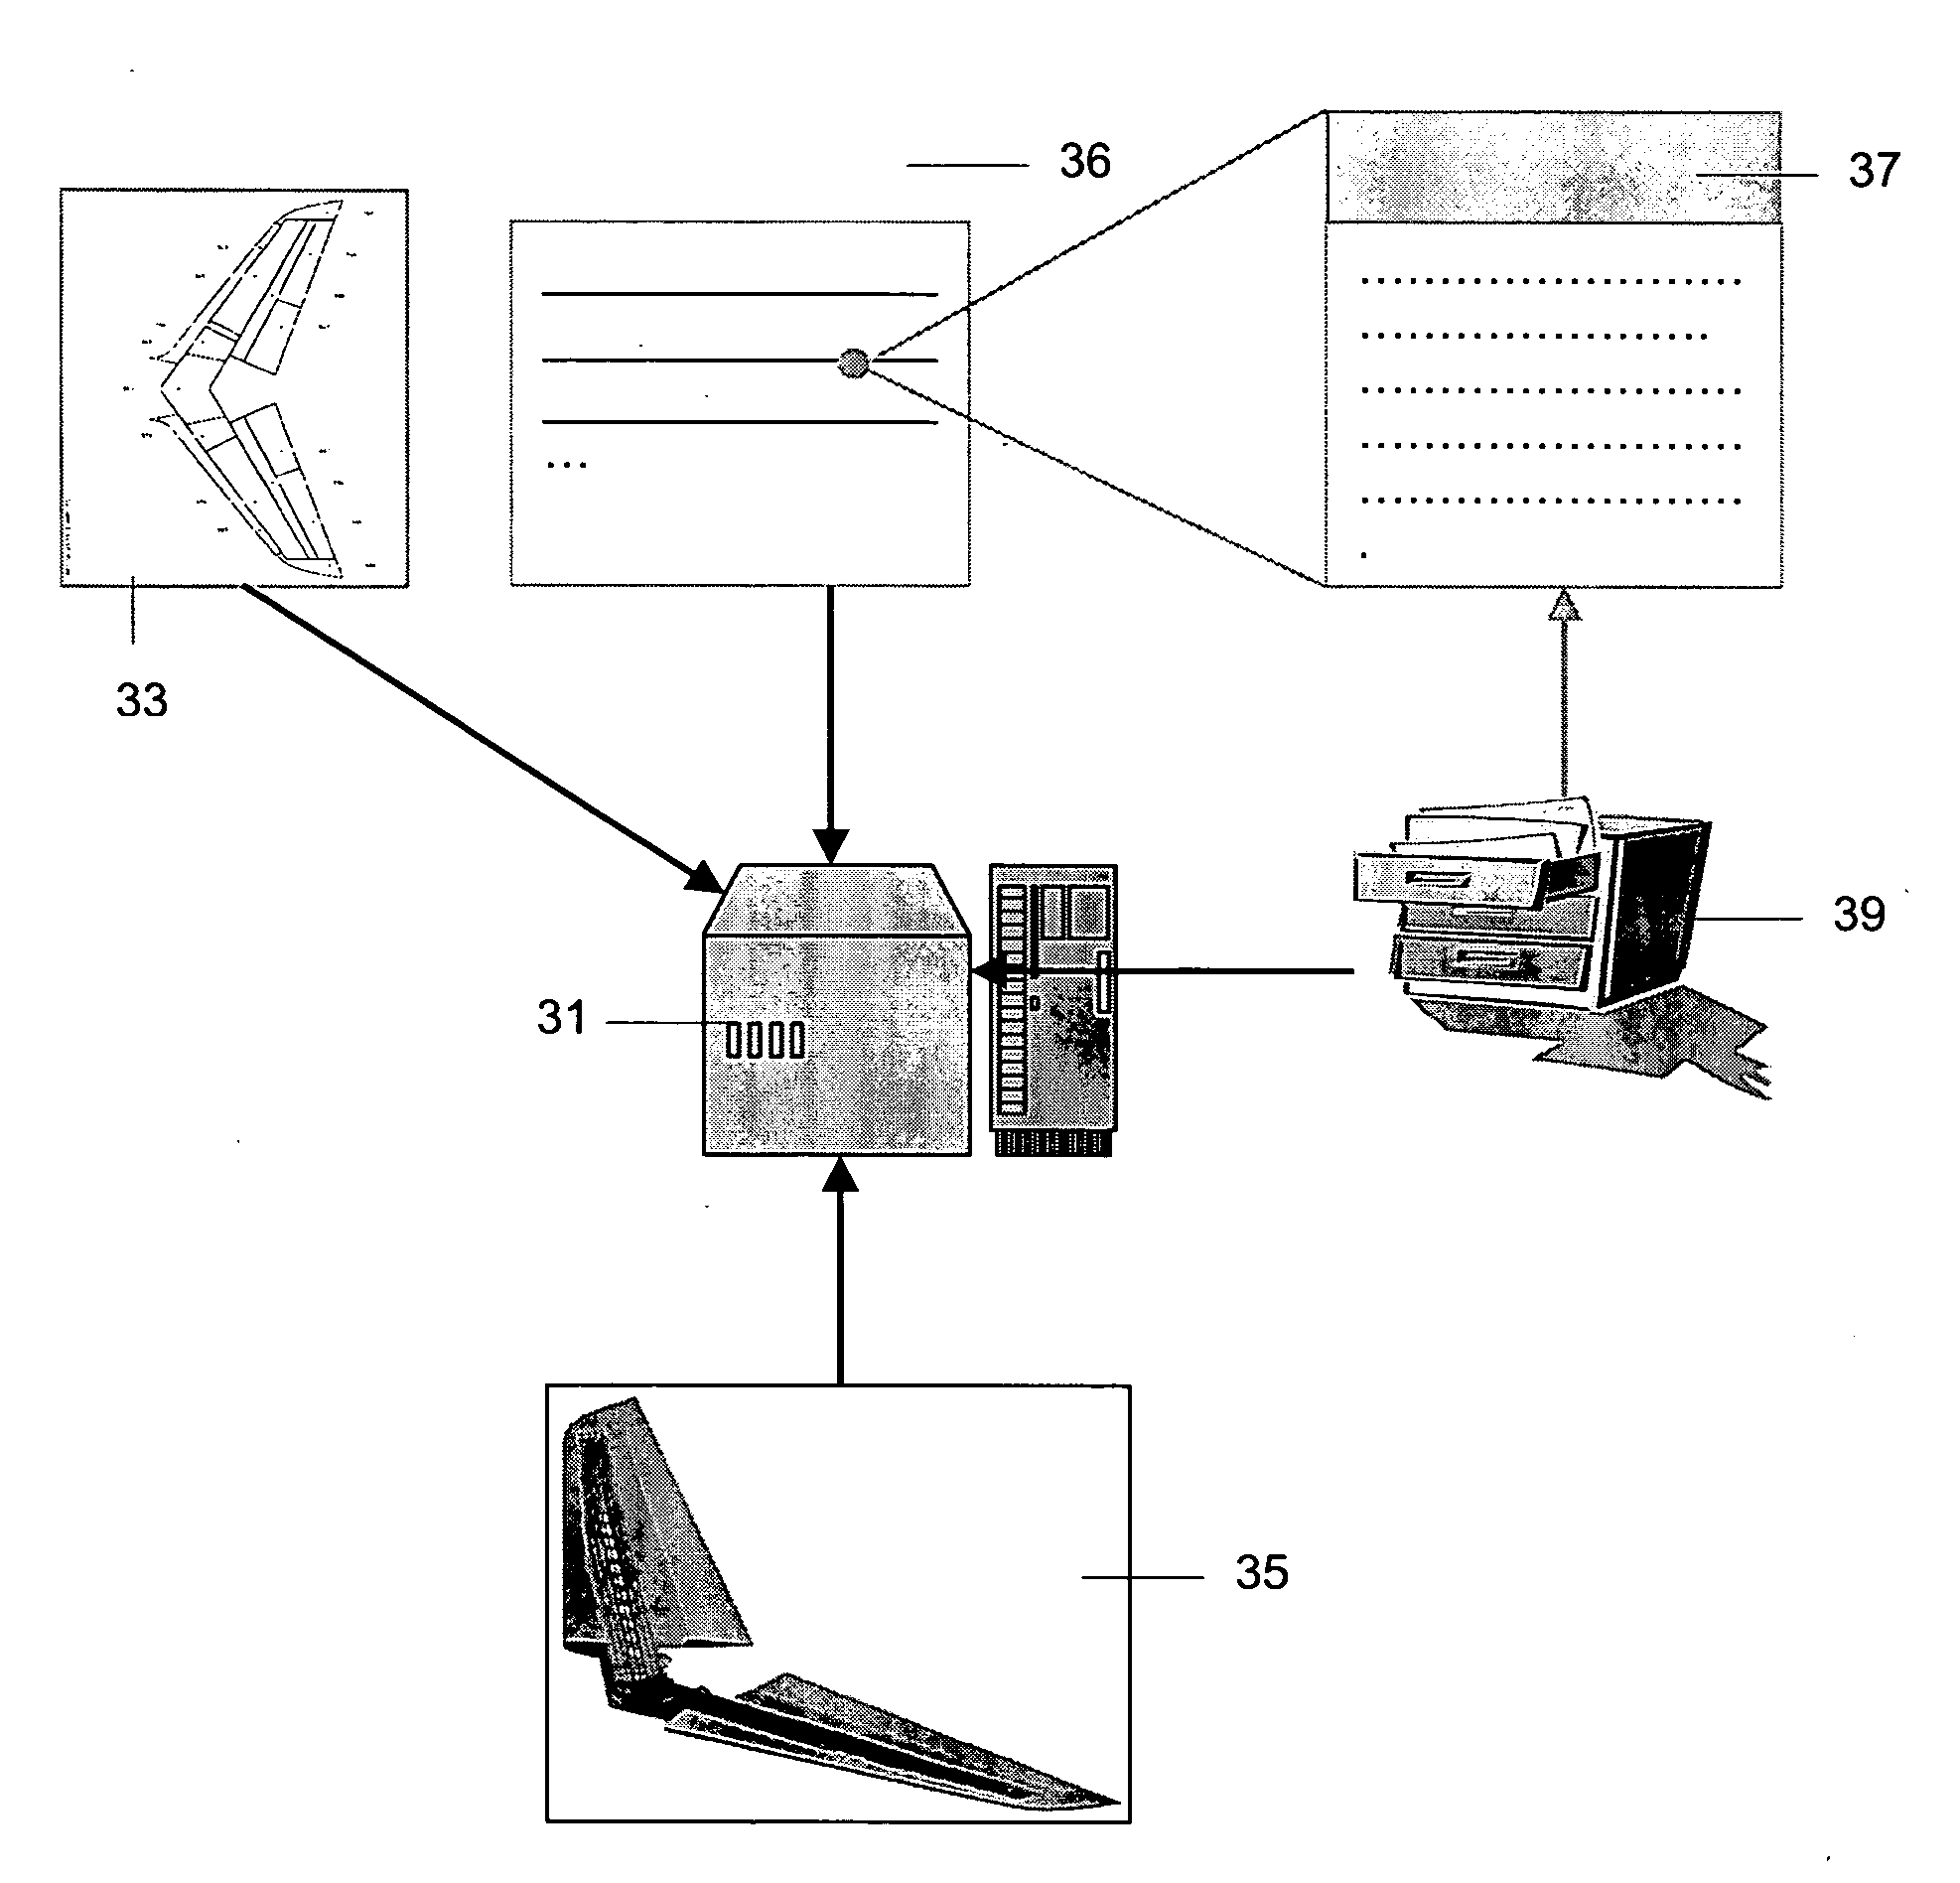 System and method for performing a Zonal Safety Analysis in aircraft design